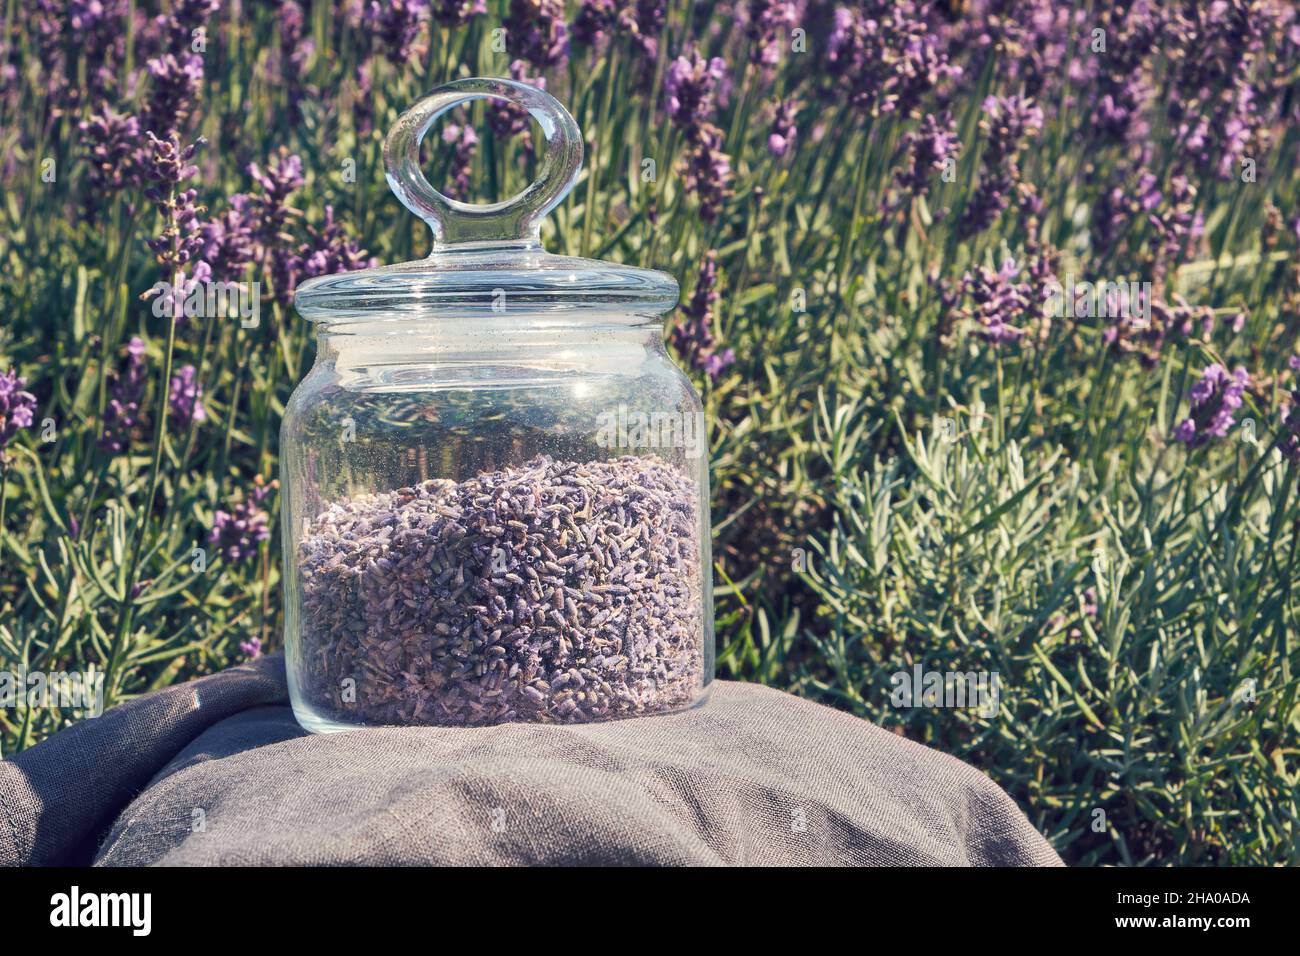 Glass jar of dry lavender flowers for making herbal tea. Blooming lavender bushes on background. Apothecary garden. Stock Photo